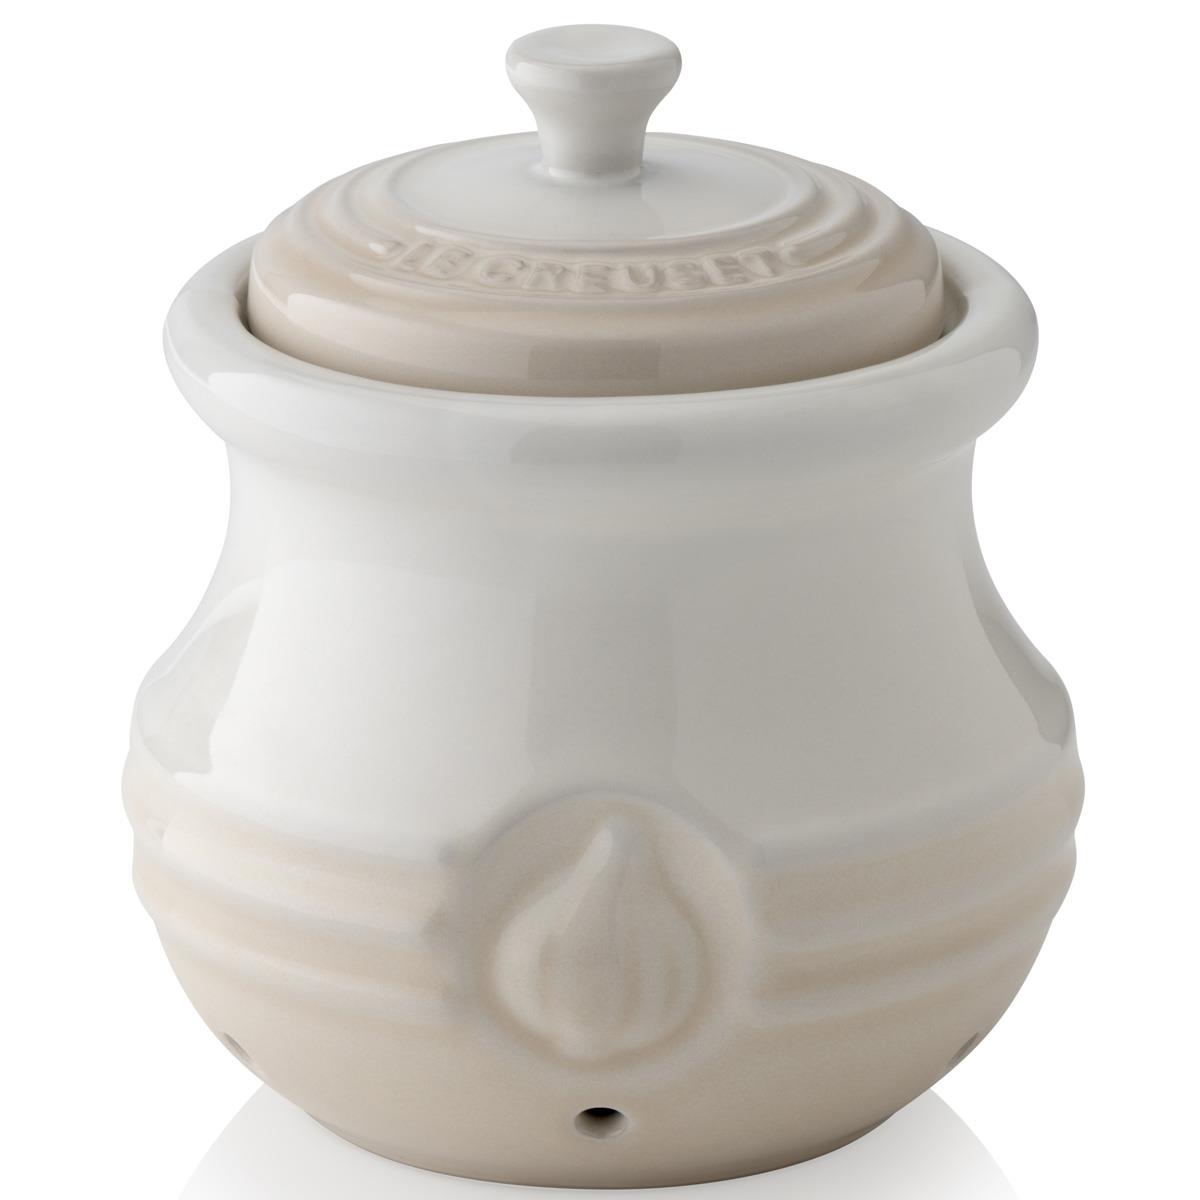 What is the reference number for the Le Creuset garlic keeper?